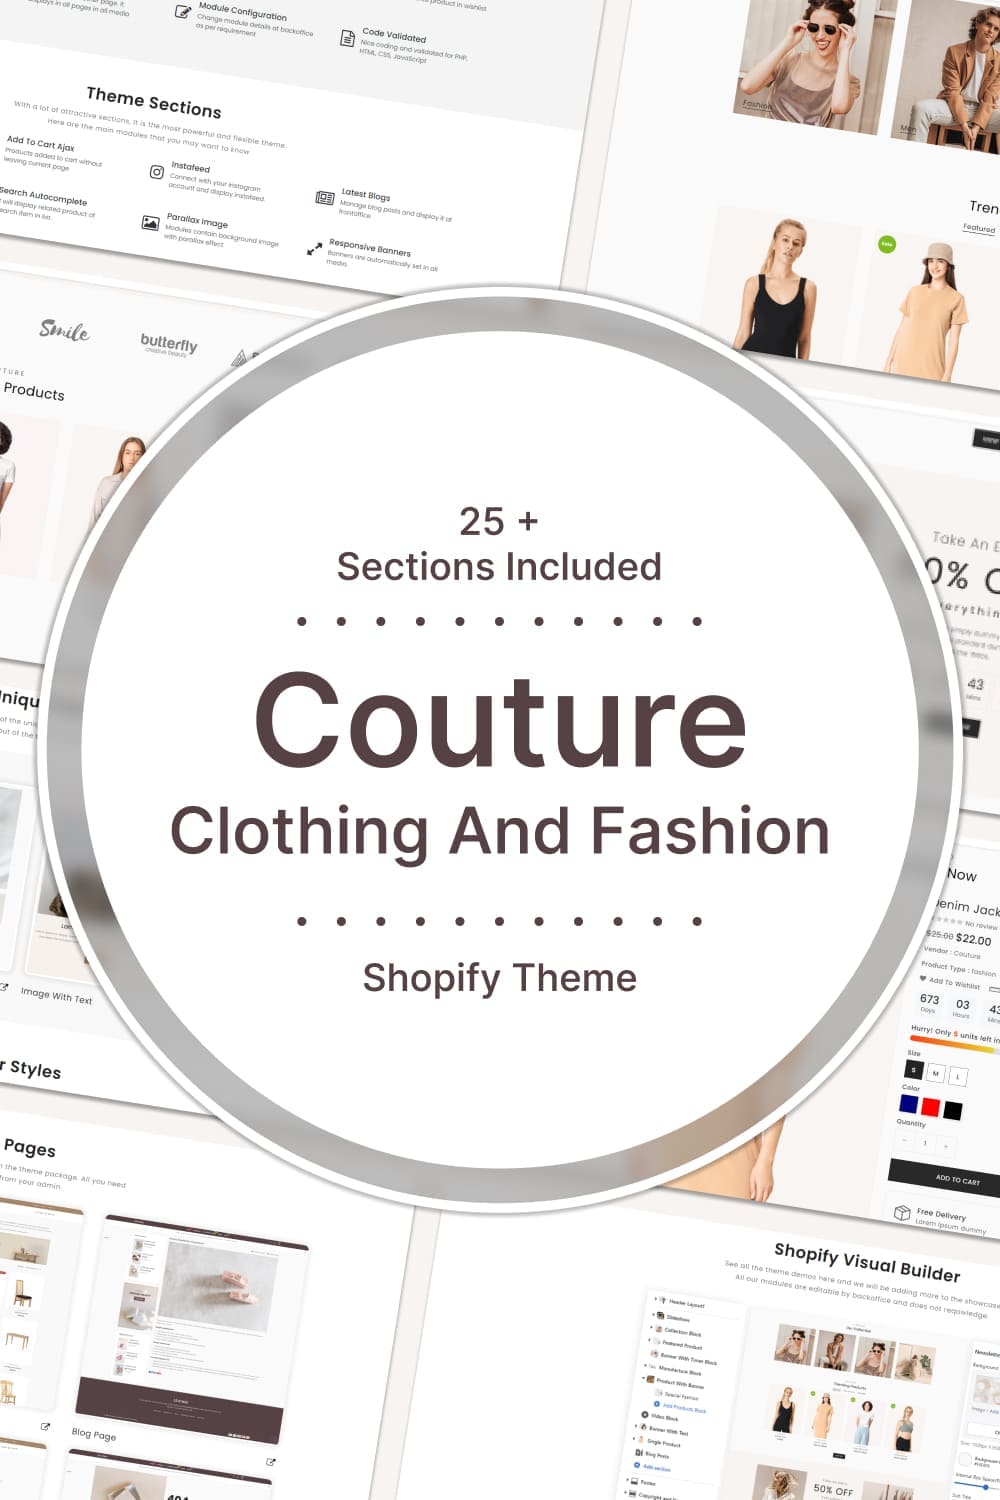 Couture clothing and fashion shopify theme.